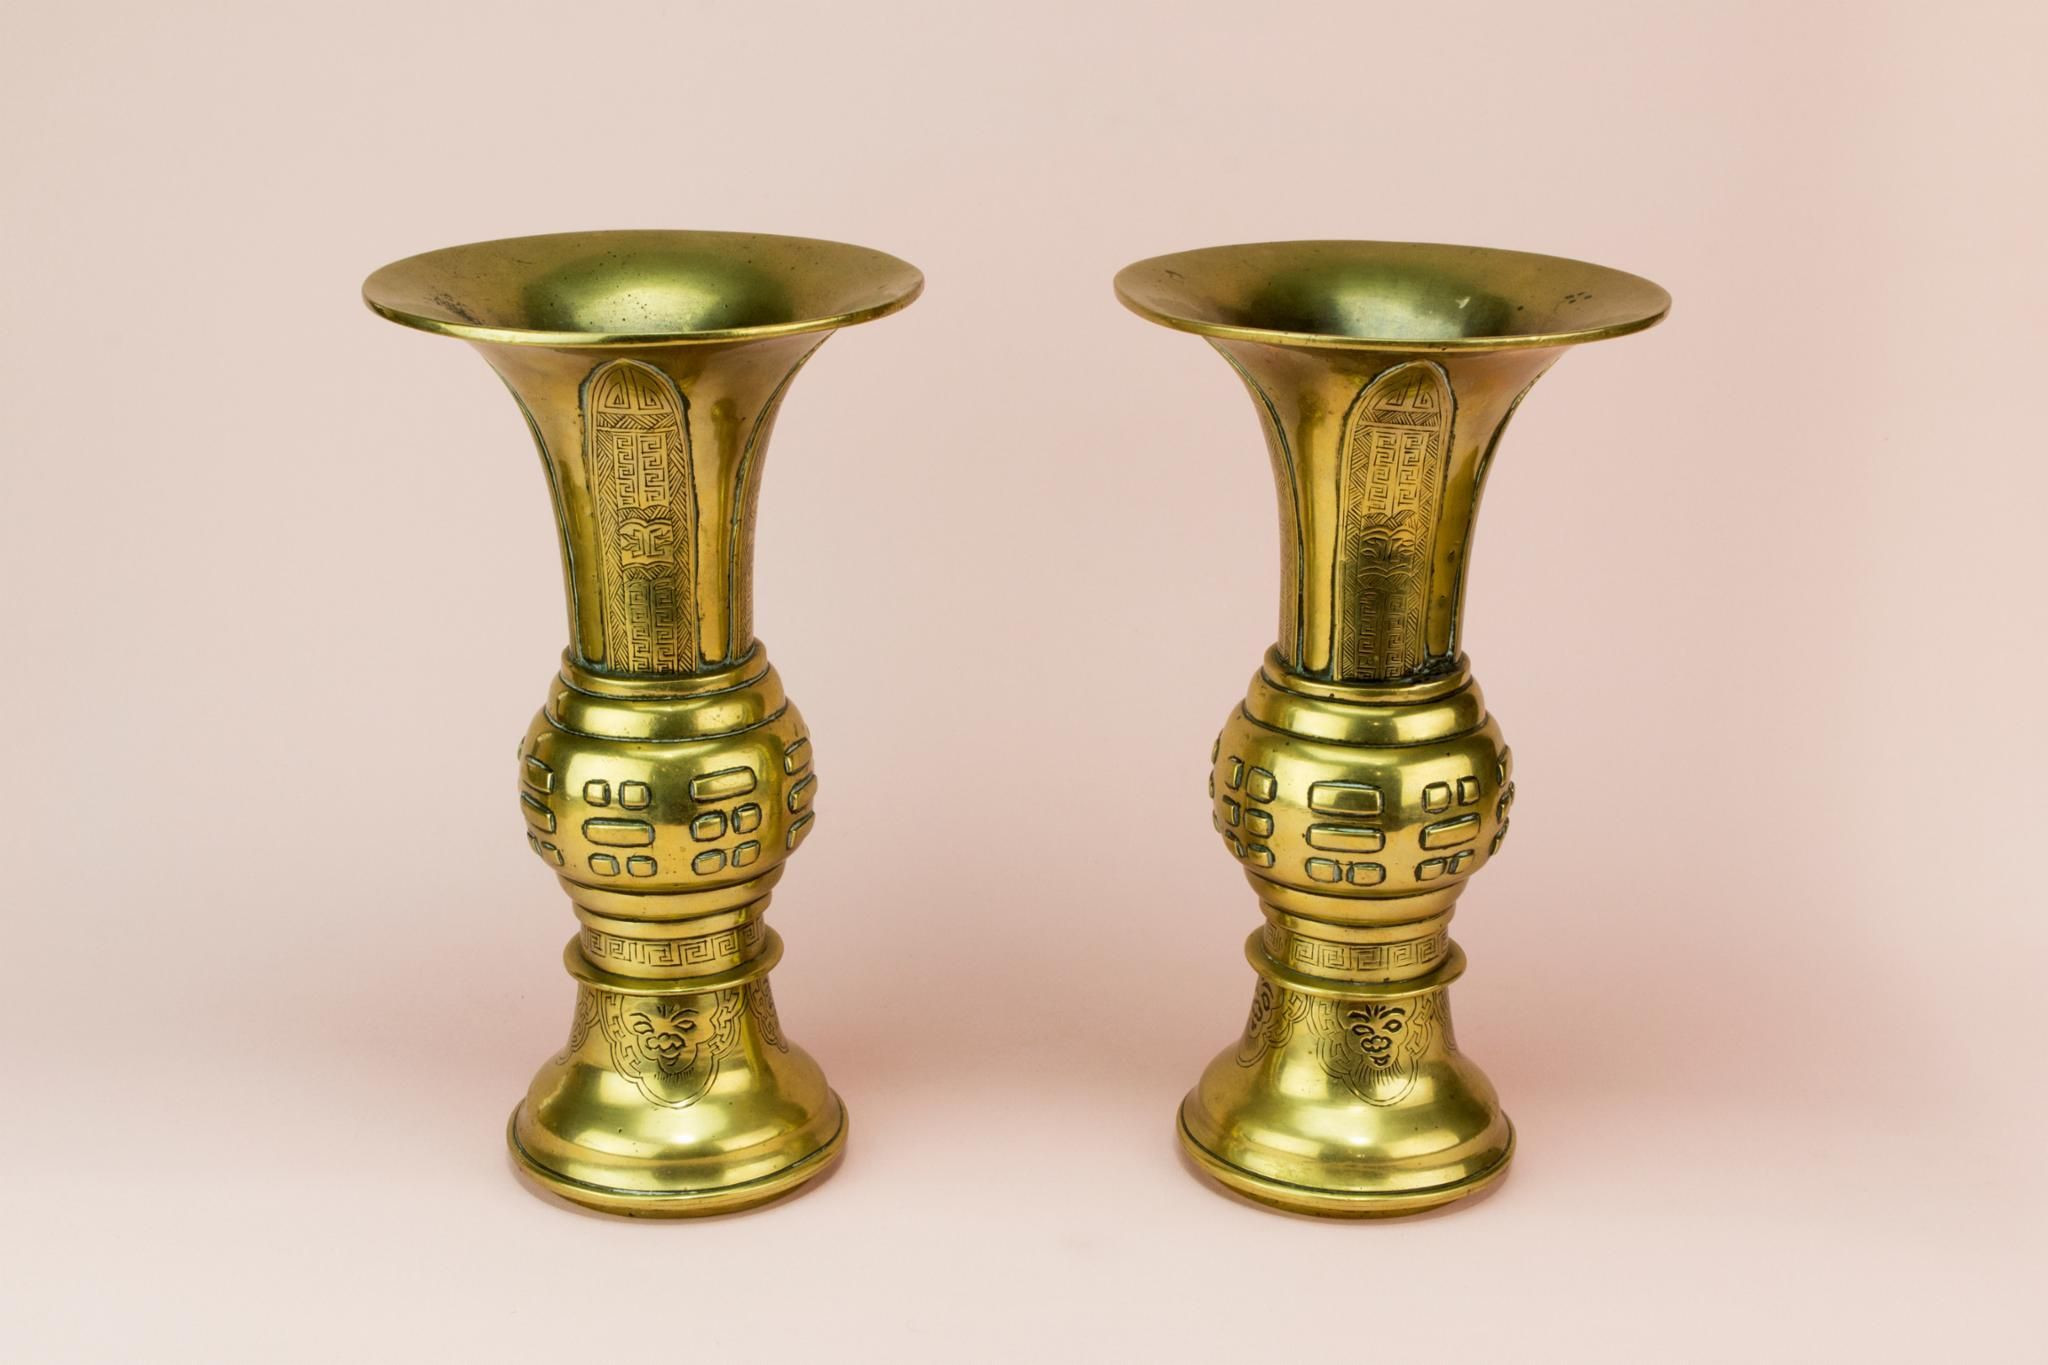 20 Perfect Sand Art Glass Vases 2024 free download sand art glass vases of 44 gold and silver vase the weekly world within 2 gu shaped brass vases chinese 19th century late 19th century